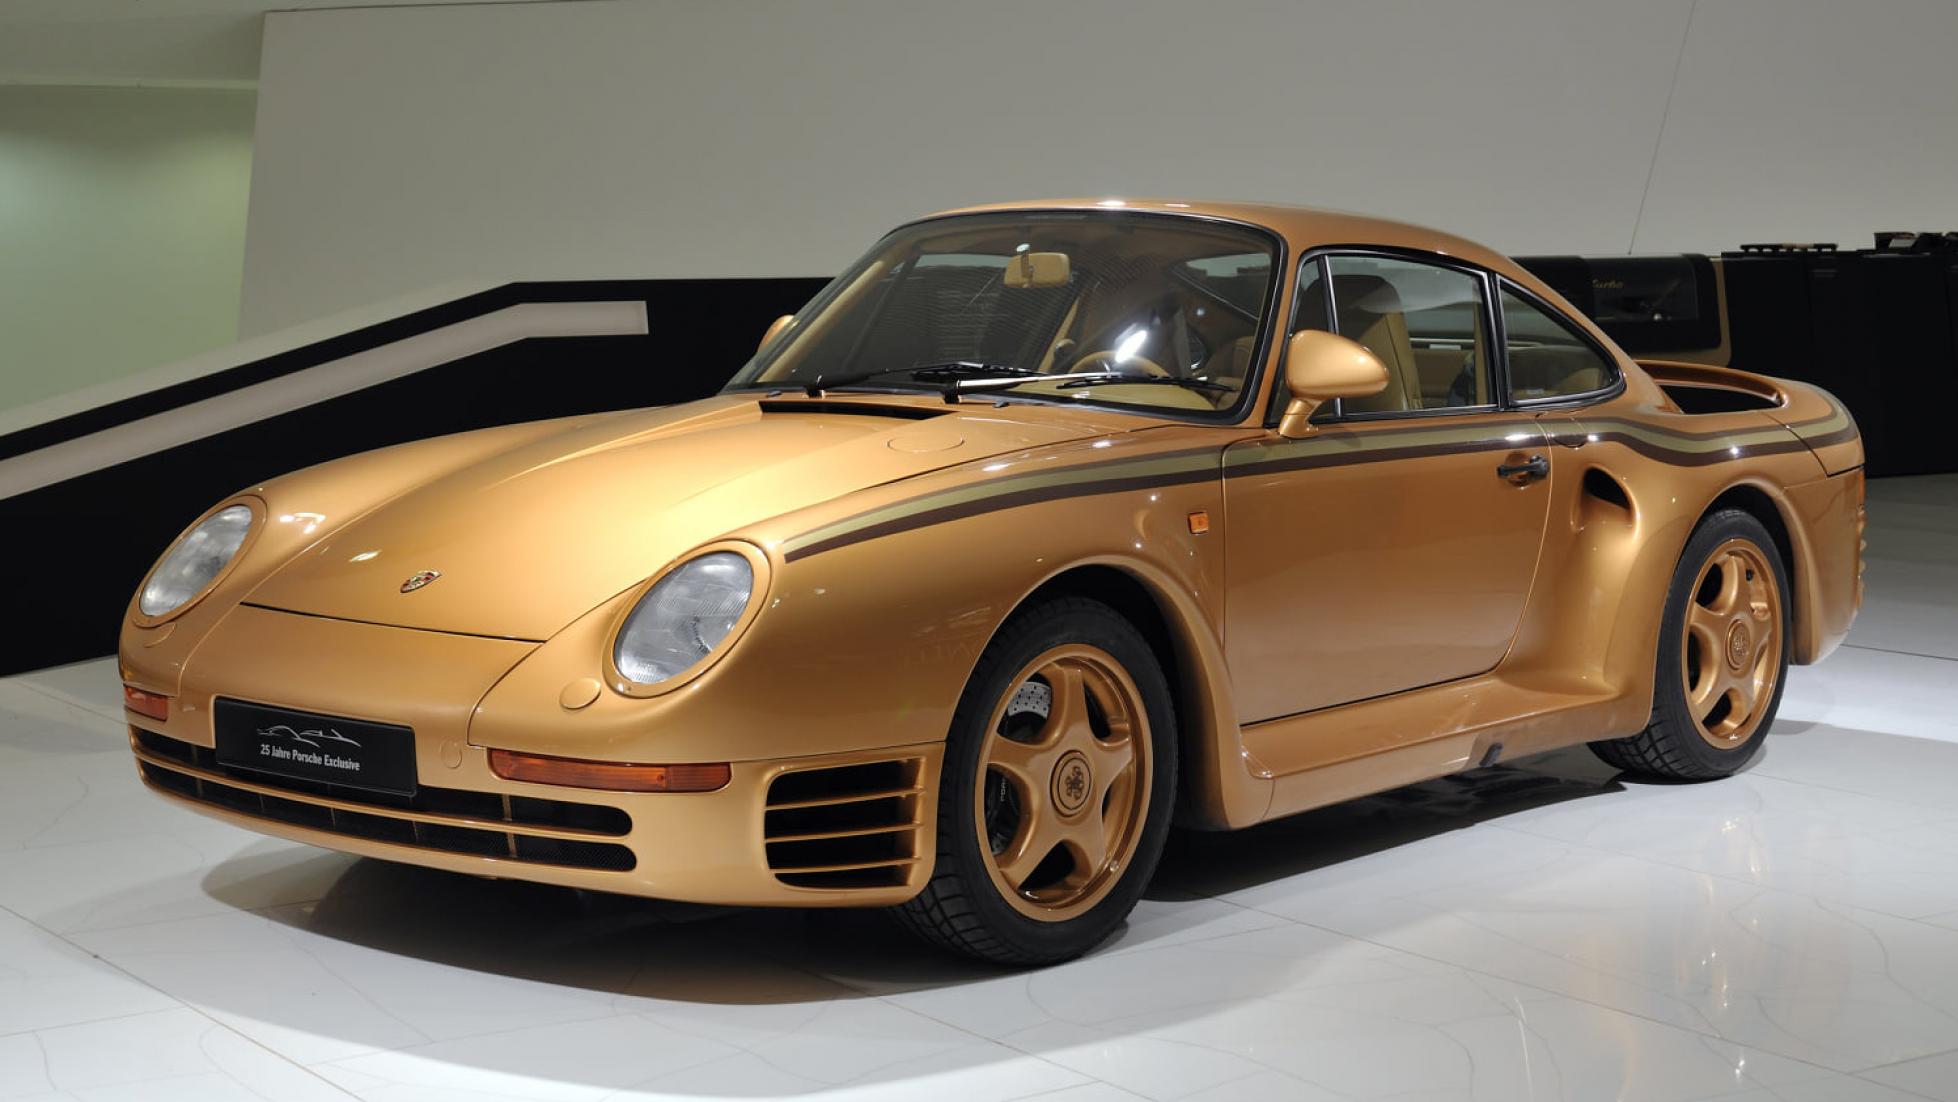 Nothing says money like a gold-on-gold Porsche 959